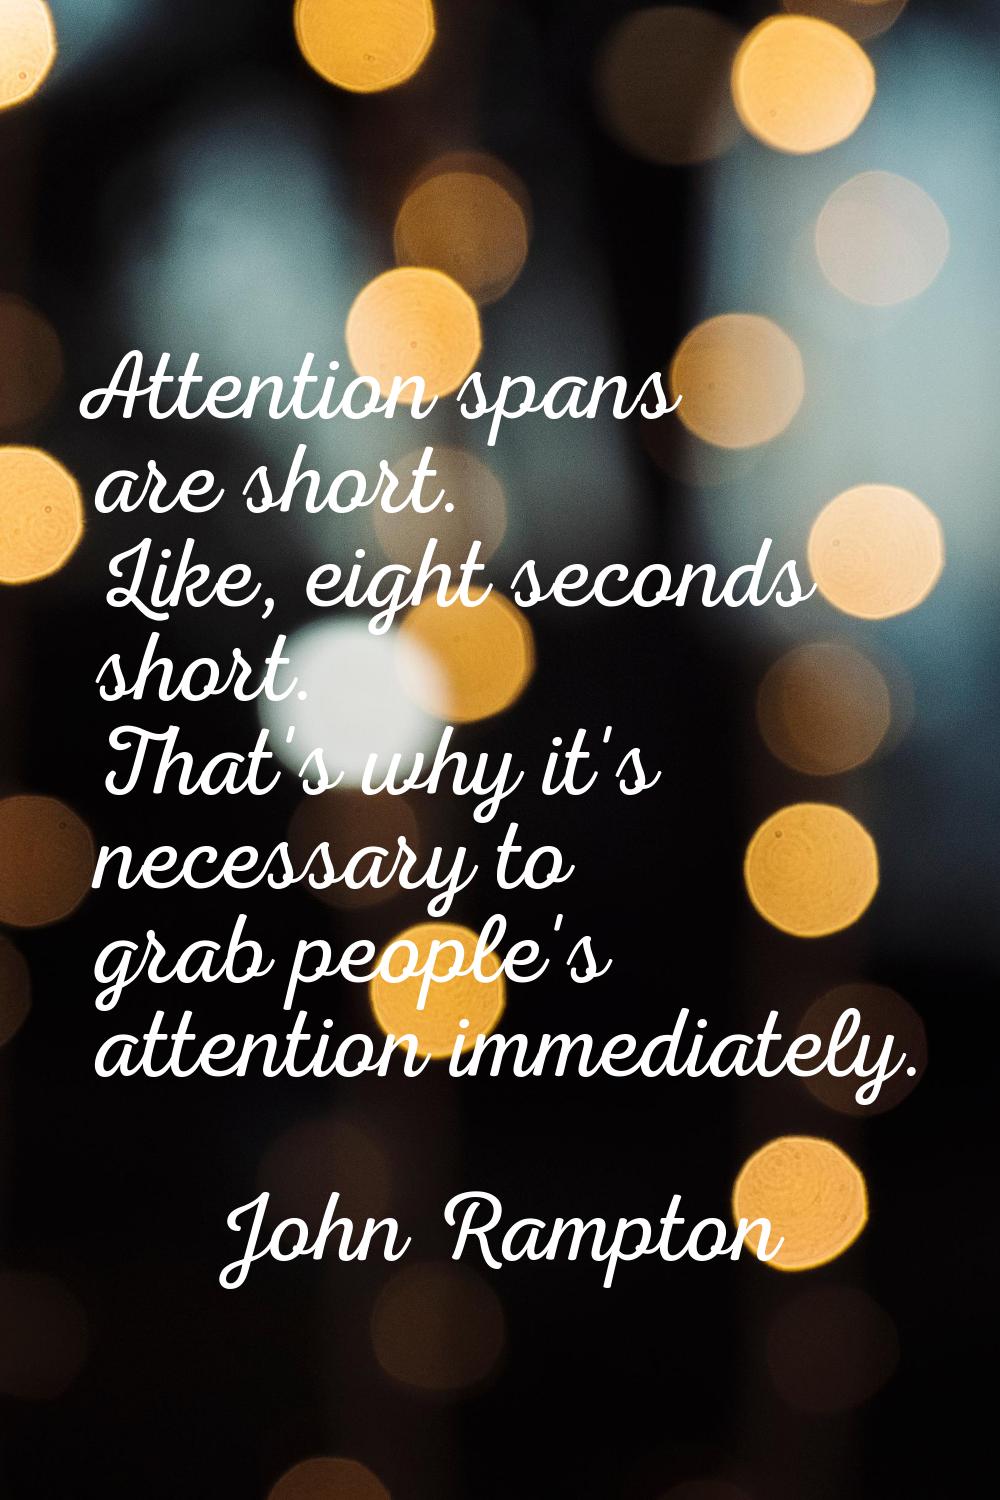 Attention spans are short. Like, eight seconds short. That's why it's necessary to grab people's at